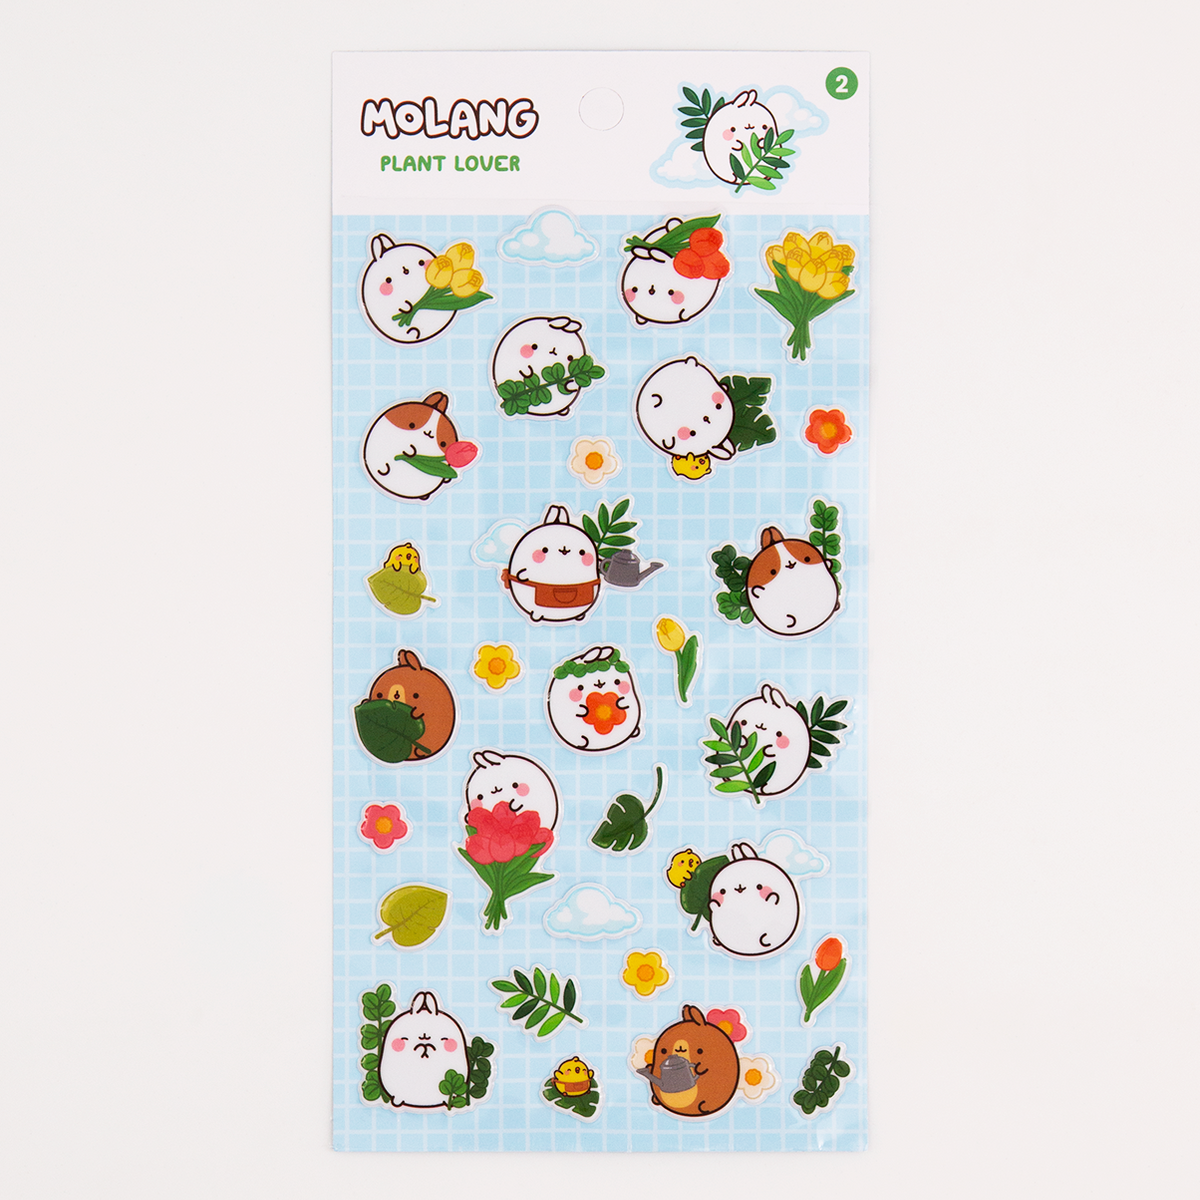 Molang 3D sticker board PLANT LOVER